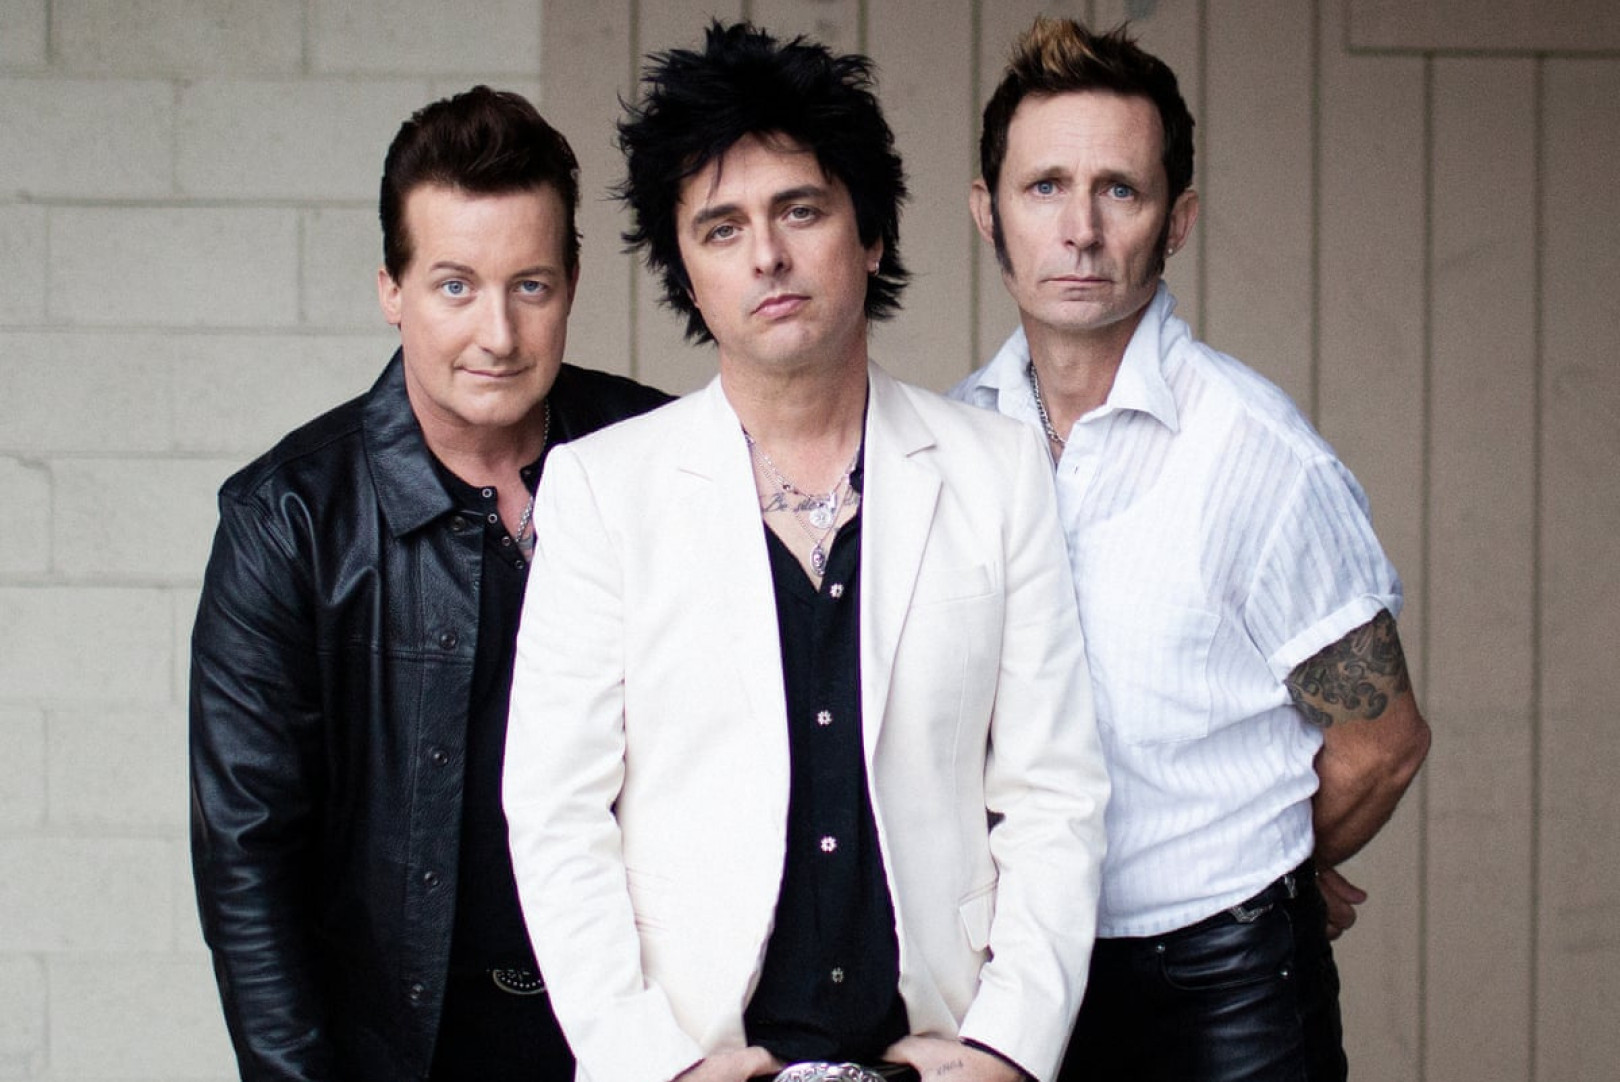 Green Day release “Nice Guys Finish Last” live video